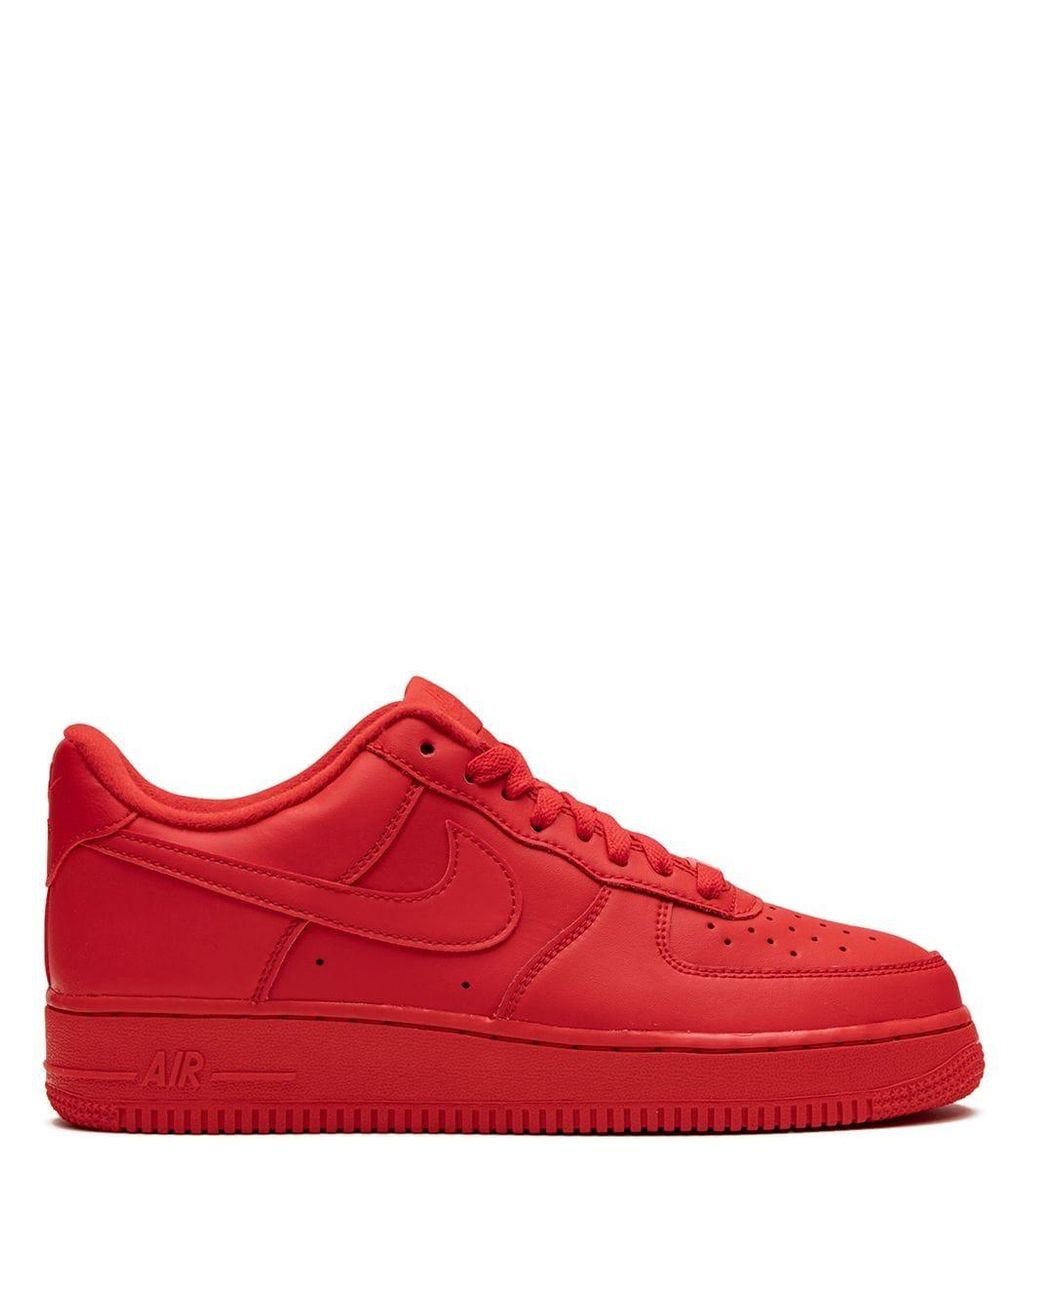 Nike Lace Air Force 1 '07 Low-top Sneakers in Red for Men - Lyst